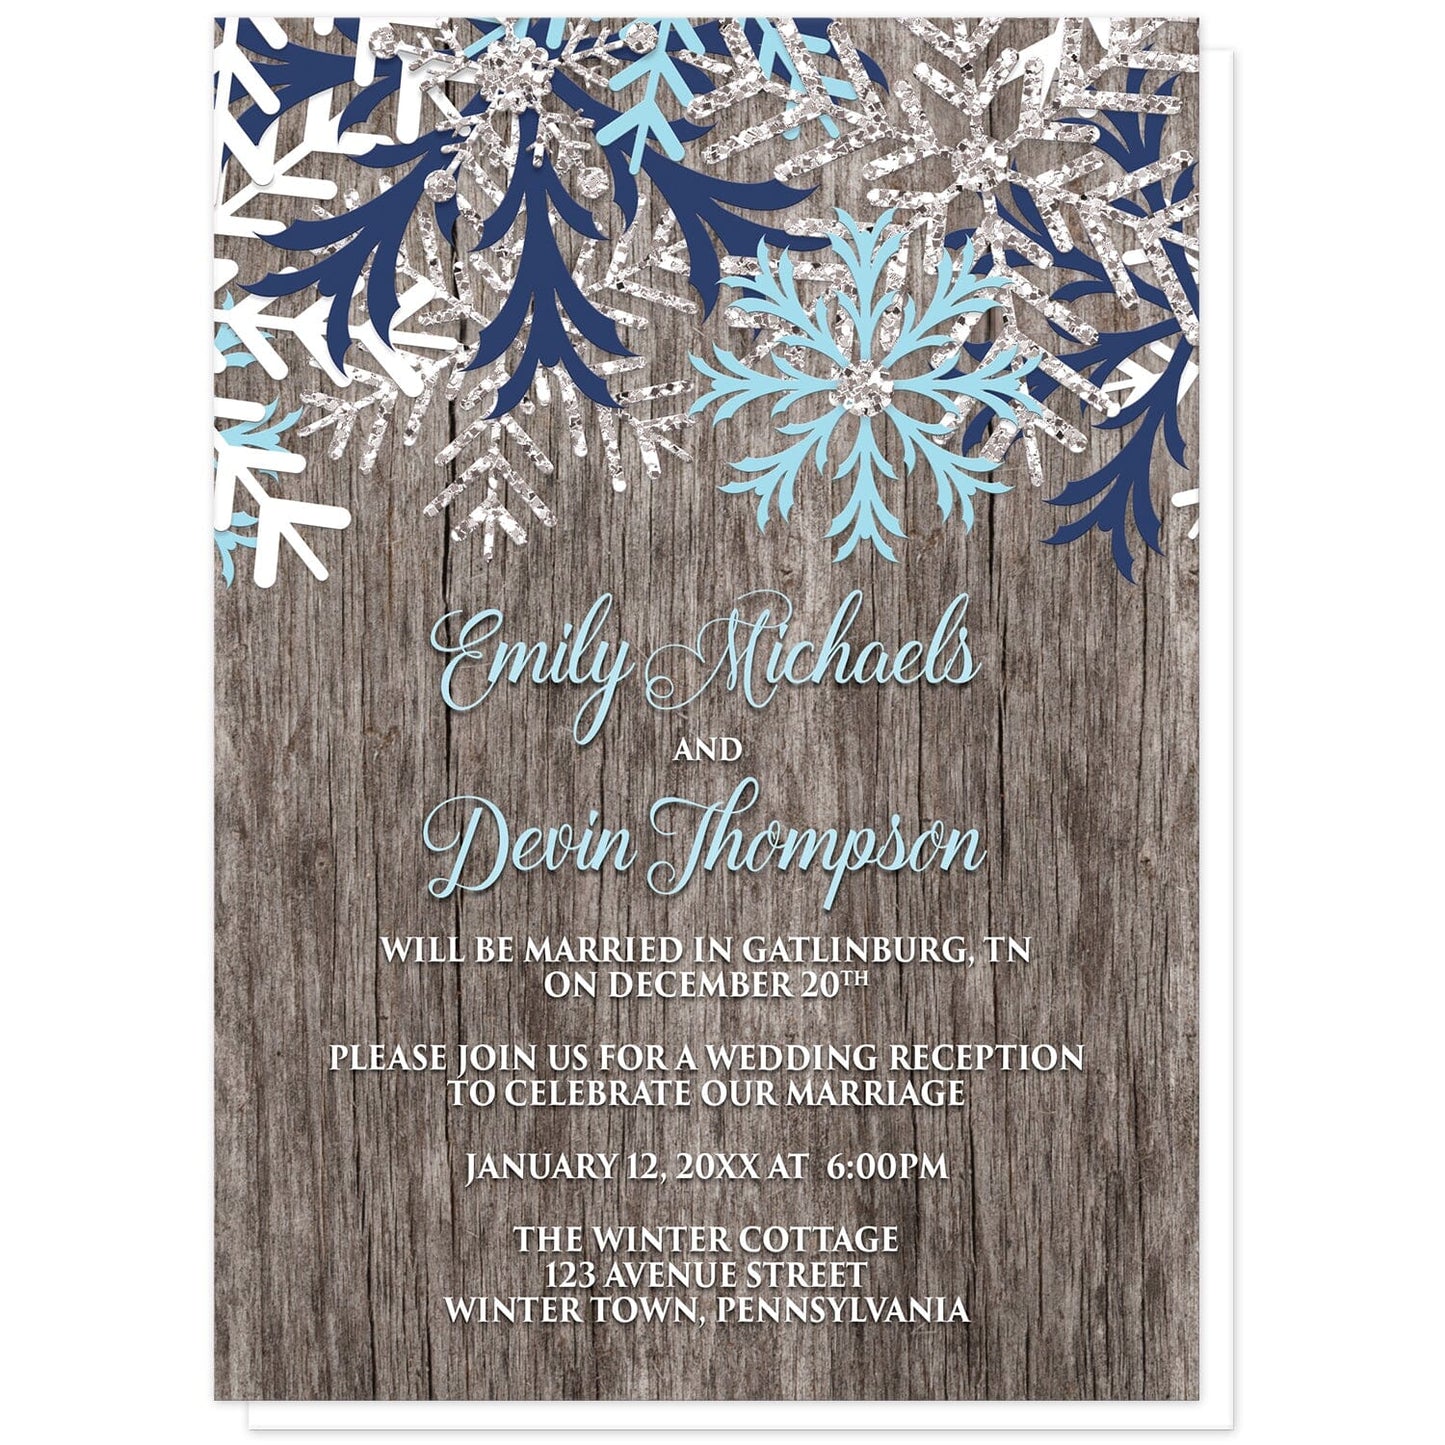 Rustic Winter Wood Navy Aqua Snowflake Reception Only Invitations at Artistically Invited. Country-inspired rustic winter wood navy aqua snowflake reception only invitations designed with light aqua blue, navy blue, white, and silver-colored glitter-illustrated snowflakes along the top over a rustic wood pattern illustration. Your personalized post-wedding reception details are custom printed in aqua blue and white over the wood background below the snowflakes.